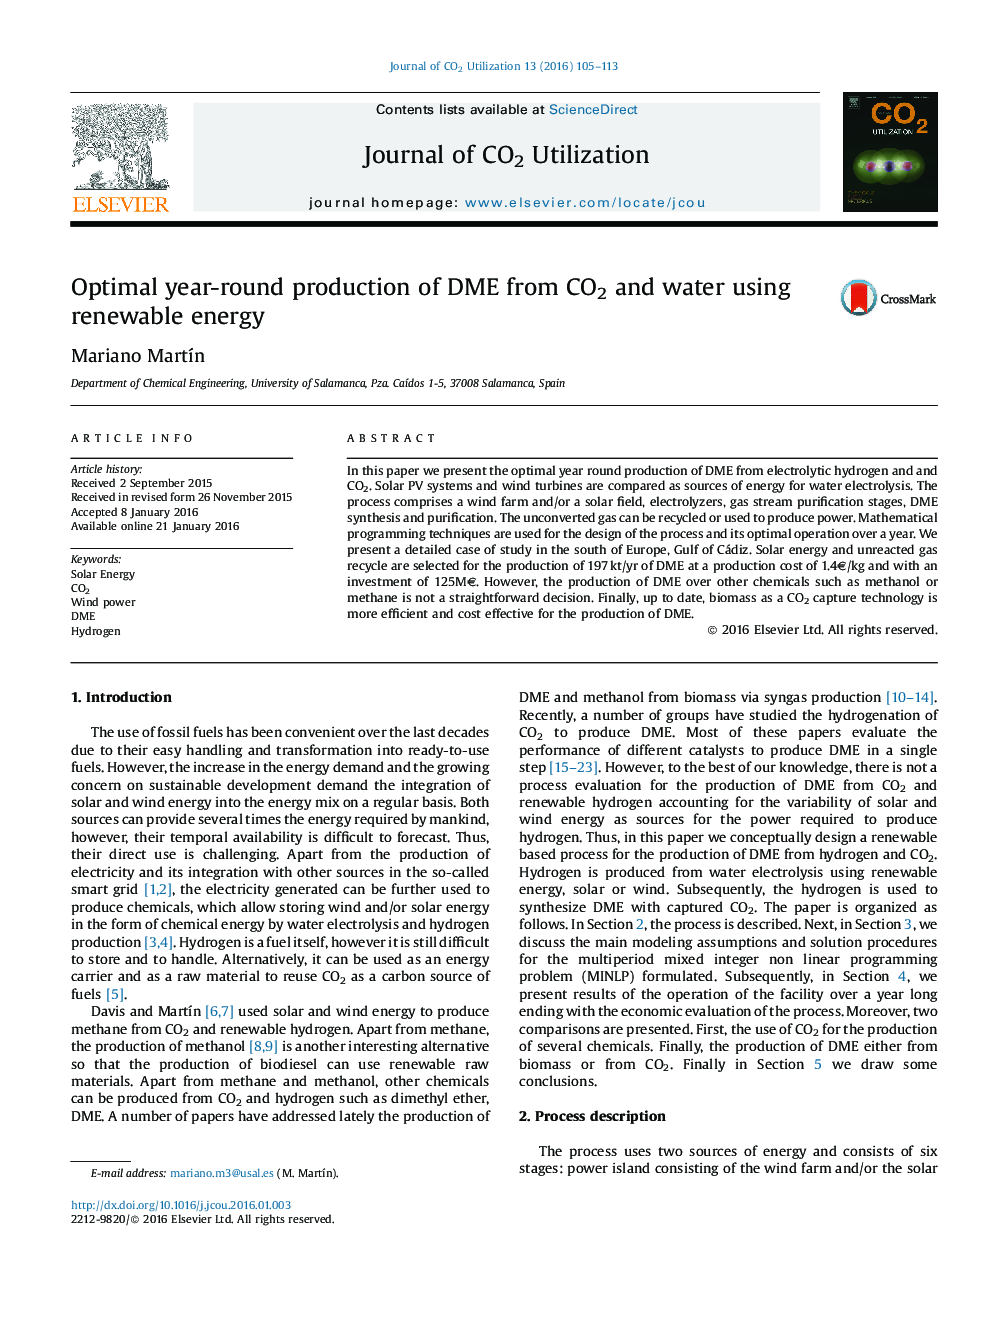 Optimal year-round production of DME from CO2 and water using renewable energy